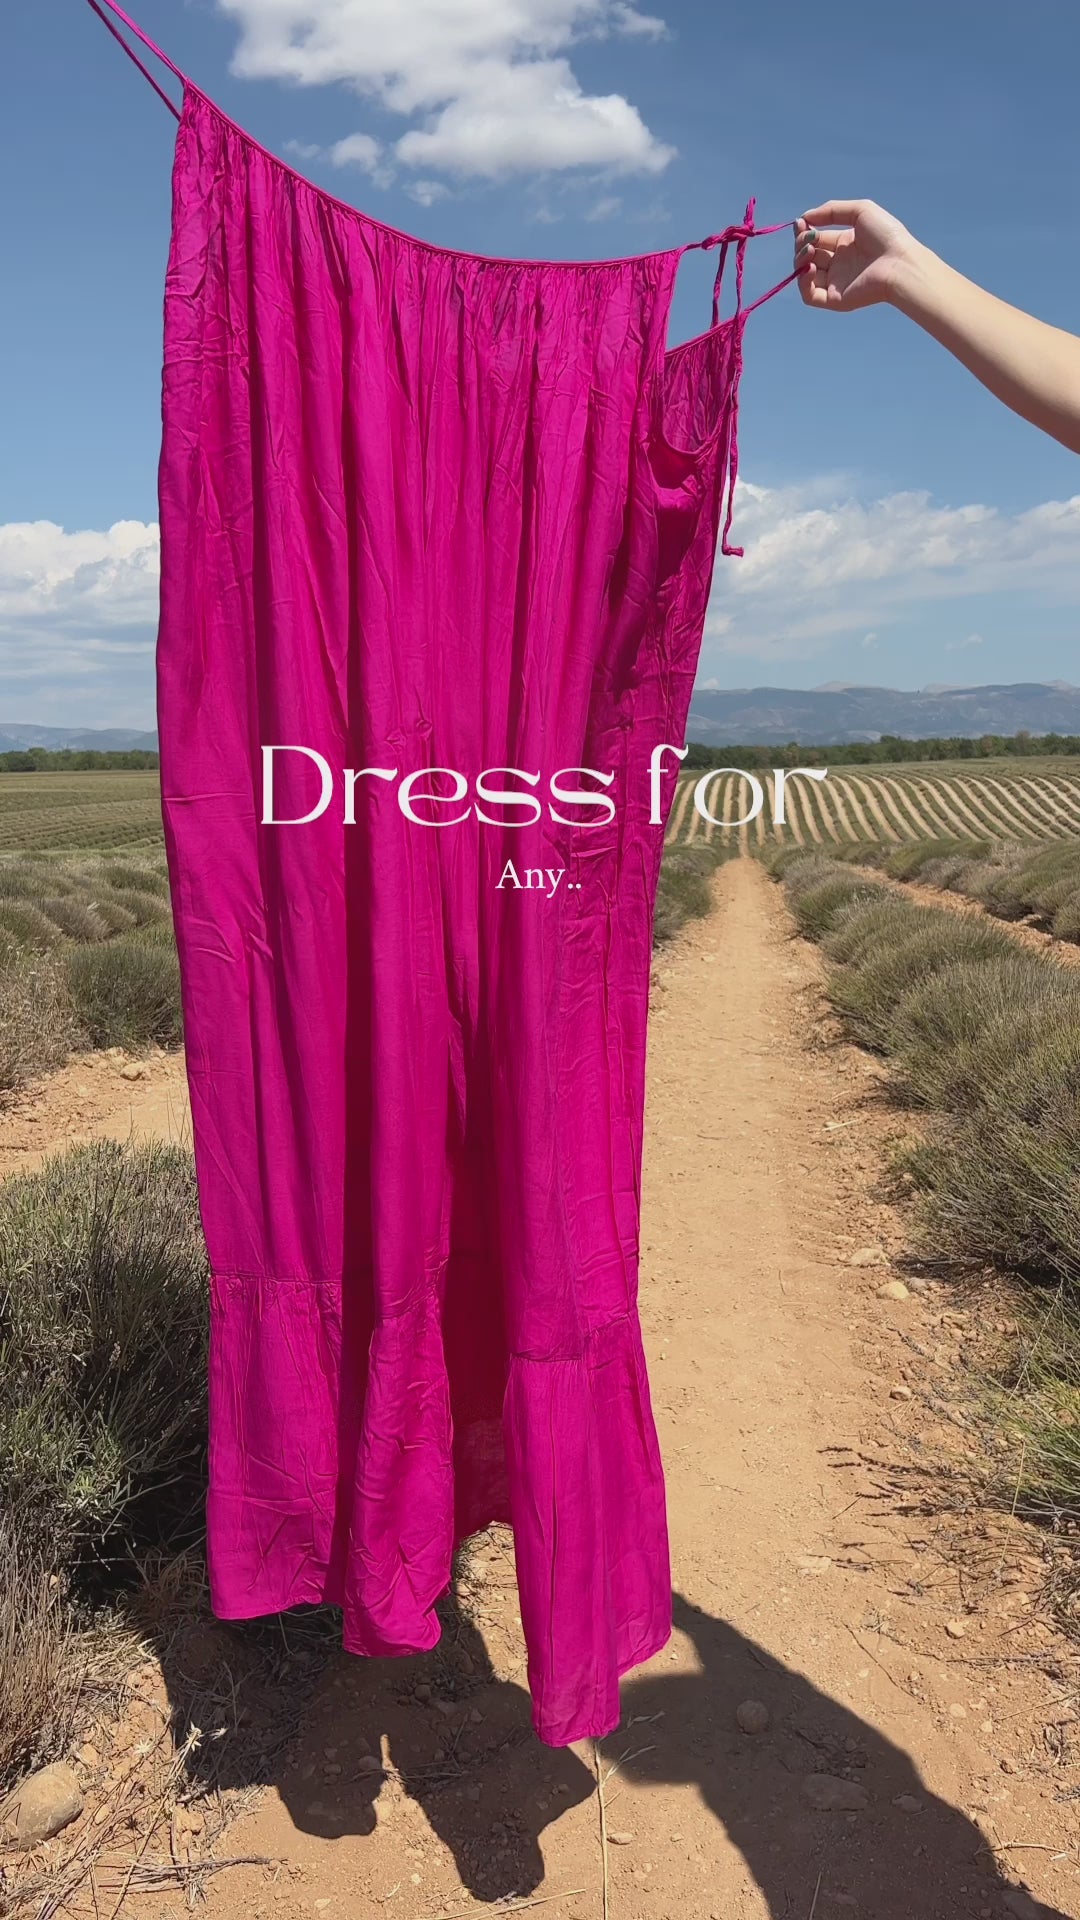 Unleash your inner fashionista with our Hot Pink Backless Maxi Dress from Mali - Shop now and stun the crowd!